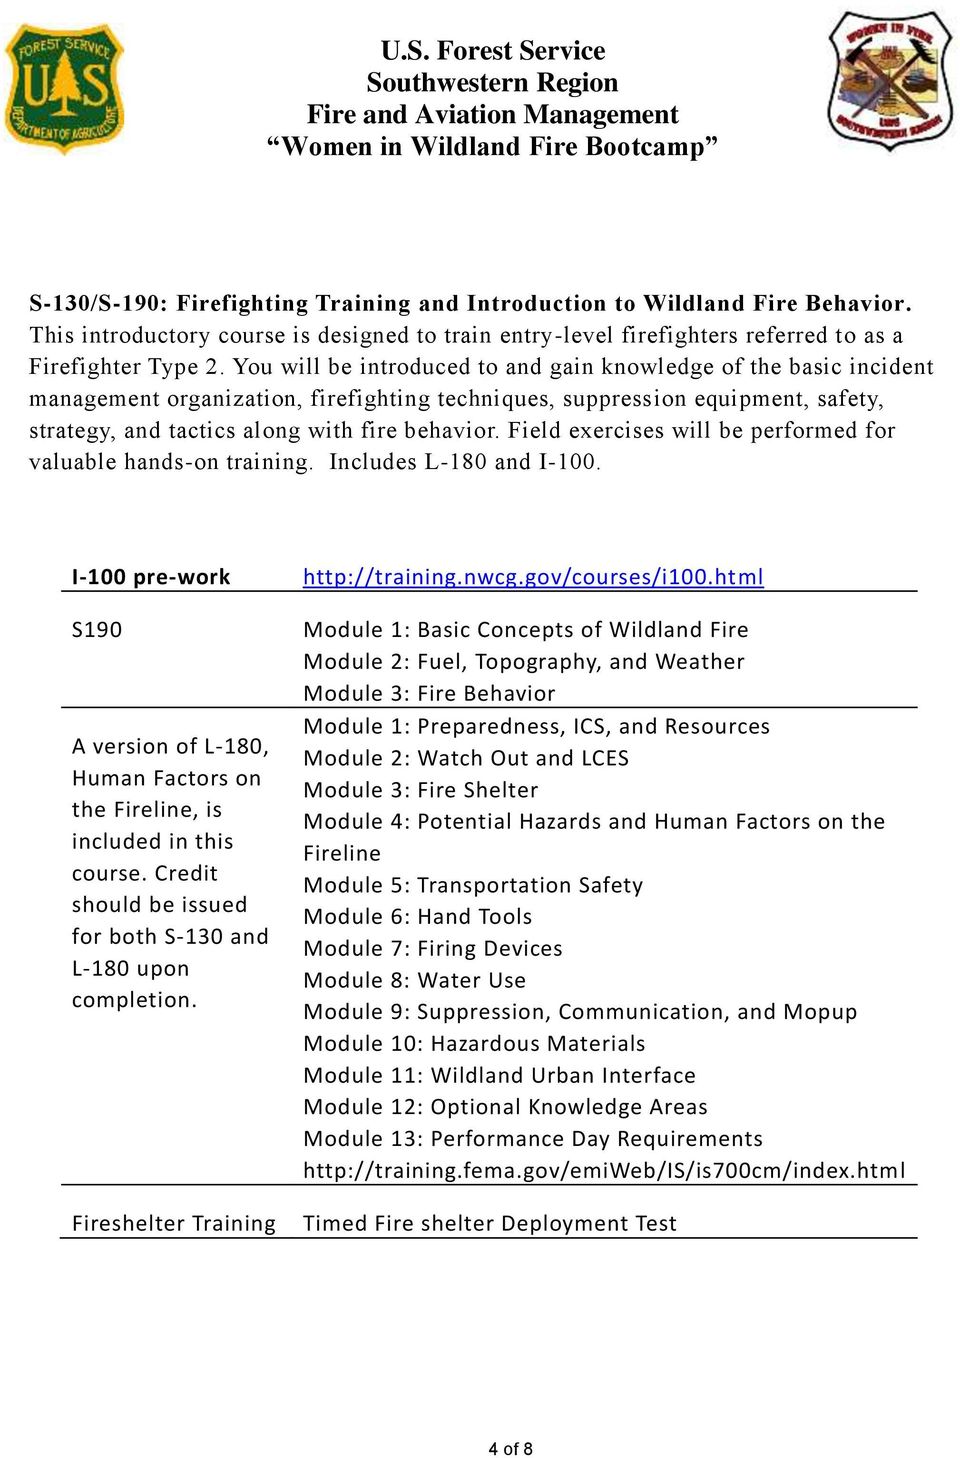 Field exercises will be performed for valuable hands-on training. Includes L-180 and I-100. I-100 pre-work http://training.nwcg.gov/courses/i100.